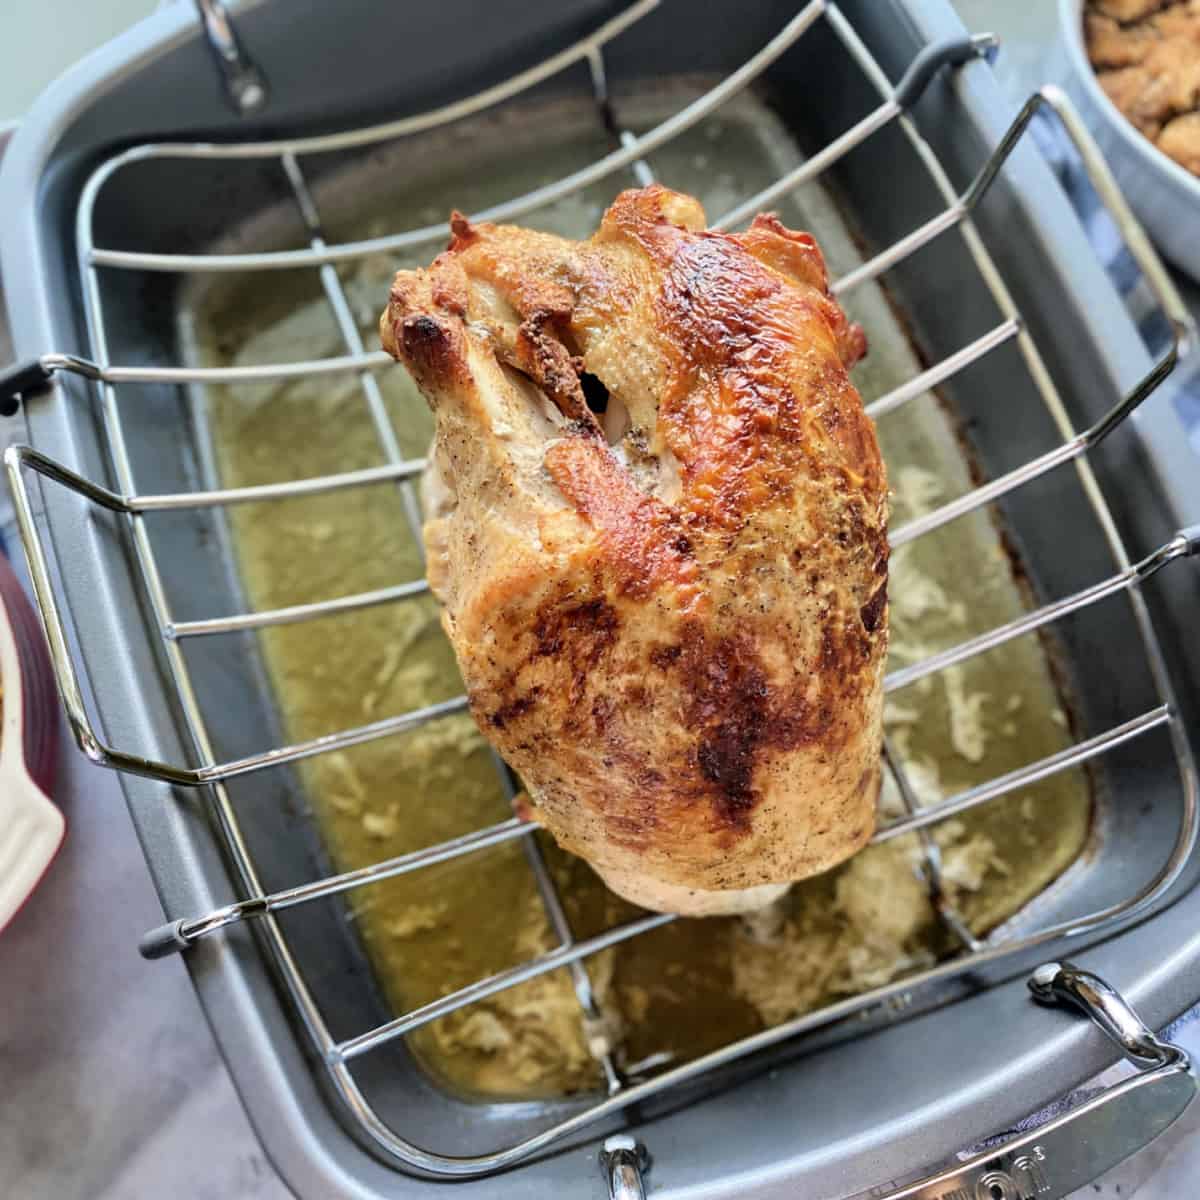 https://www.katiescucina.com/wp-content/uploads/2020/11/Oven-Roasted-Turkey-square.jpg